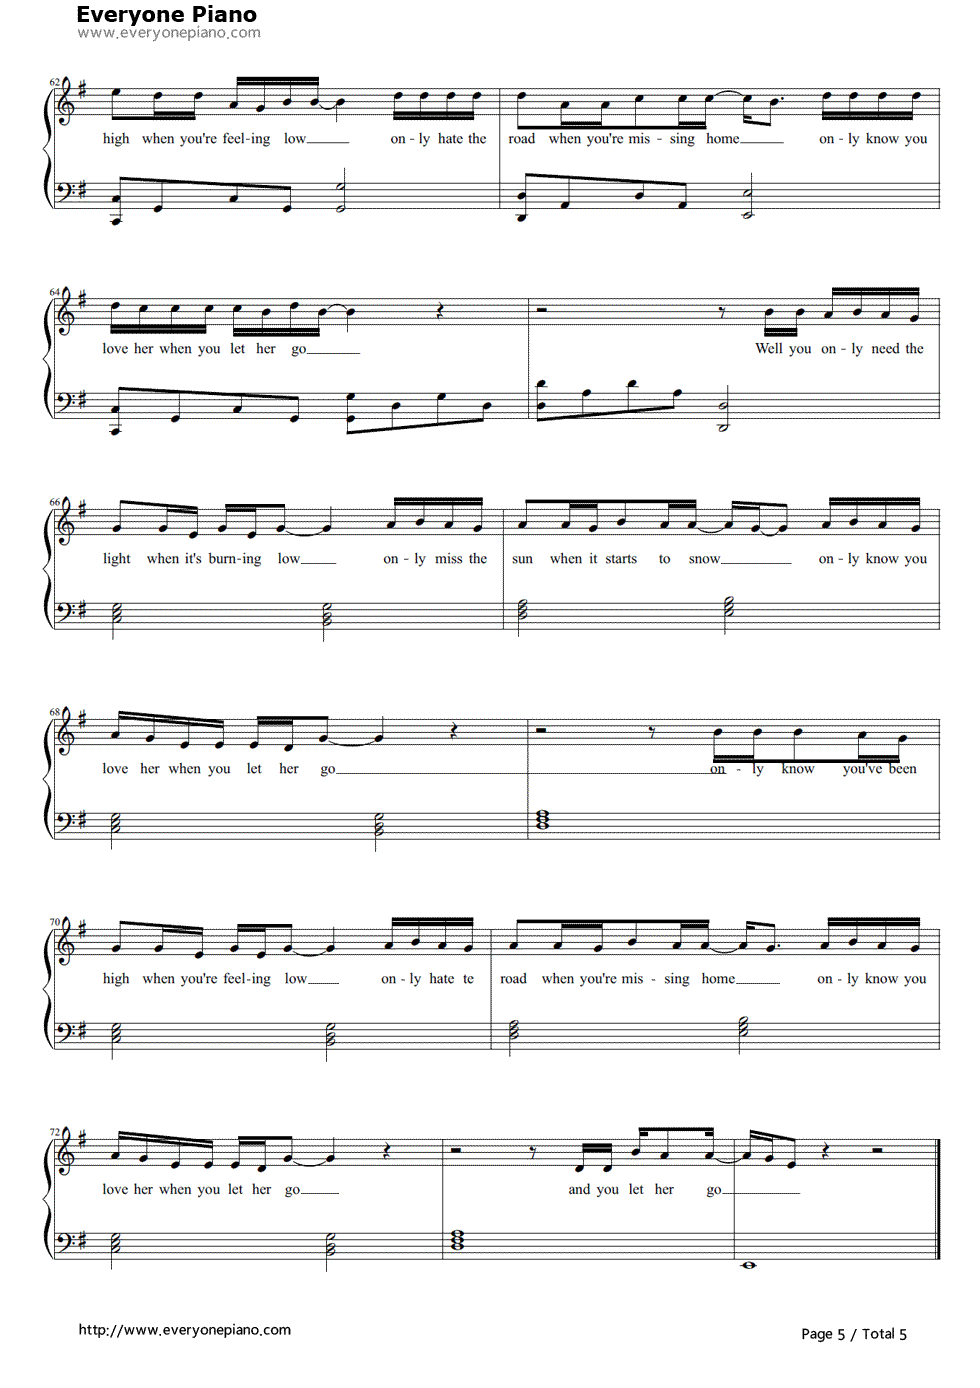 Let Her Go - Passenger Download The Pdf Here | Piano In 2019 - Airplanes Piano Sheet Music Free Printable